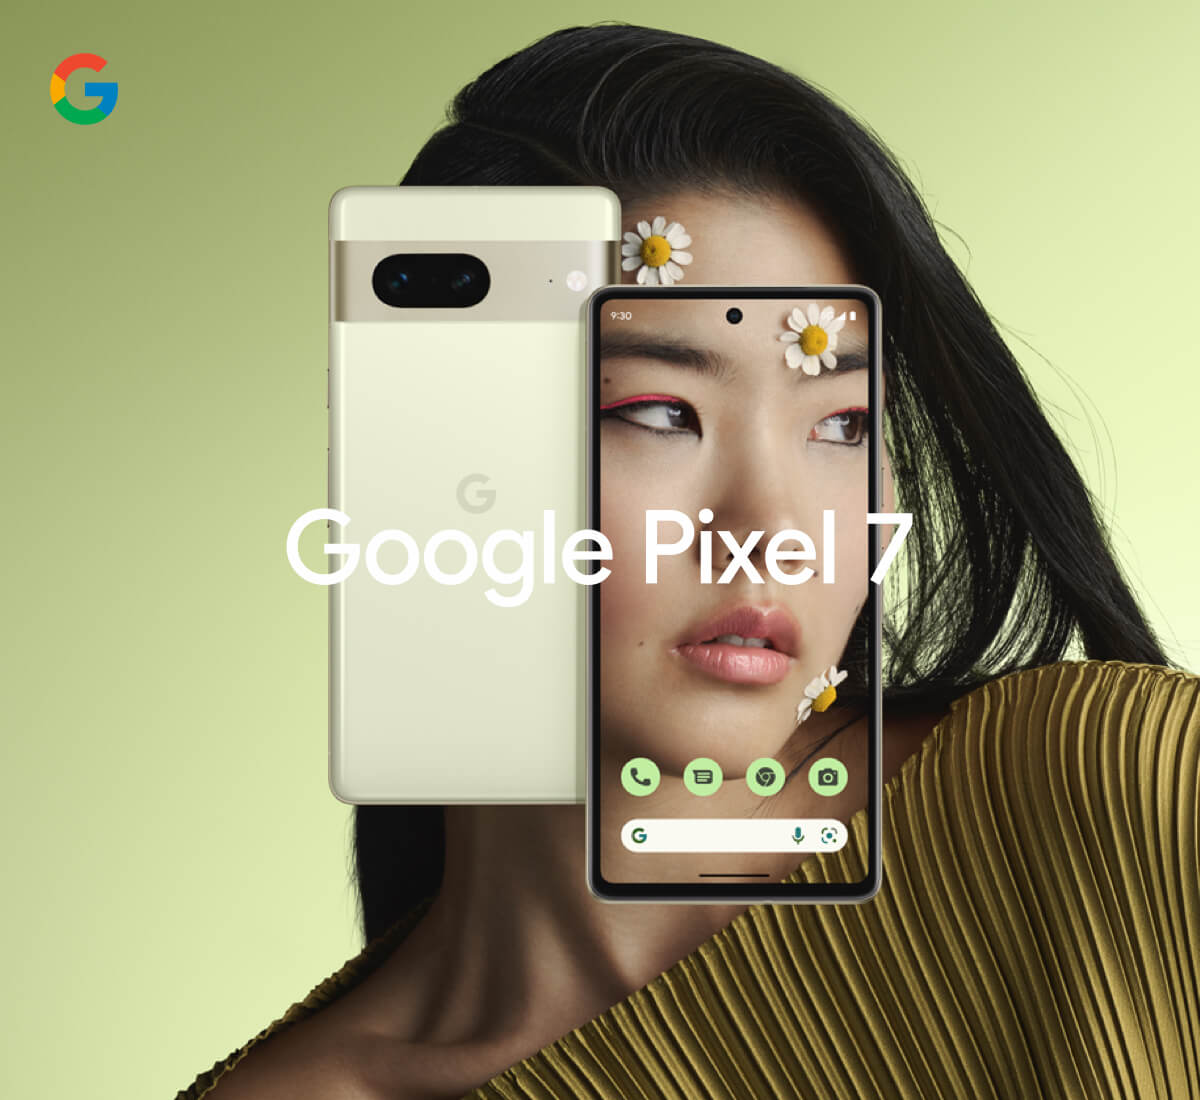 a woman’s face with daisies on her chin and forehead. 2 Google Pixel 7 phones are shown, front and back.